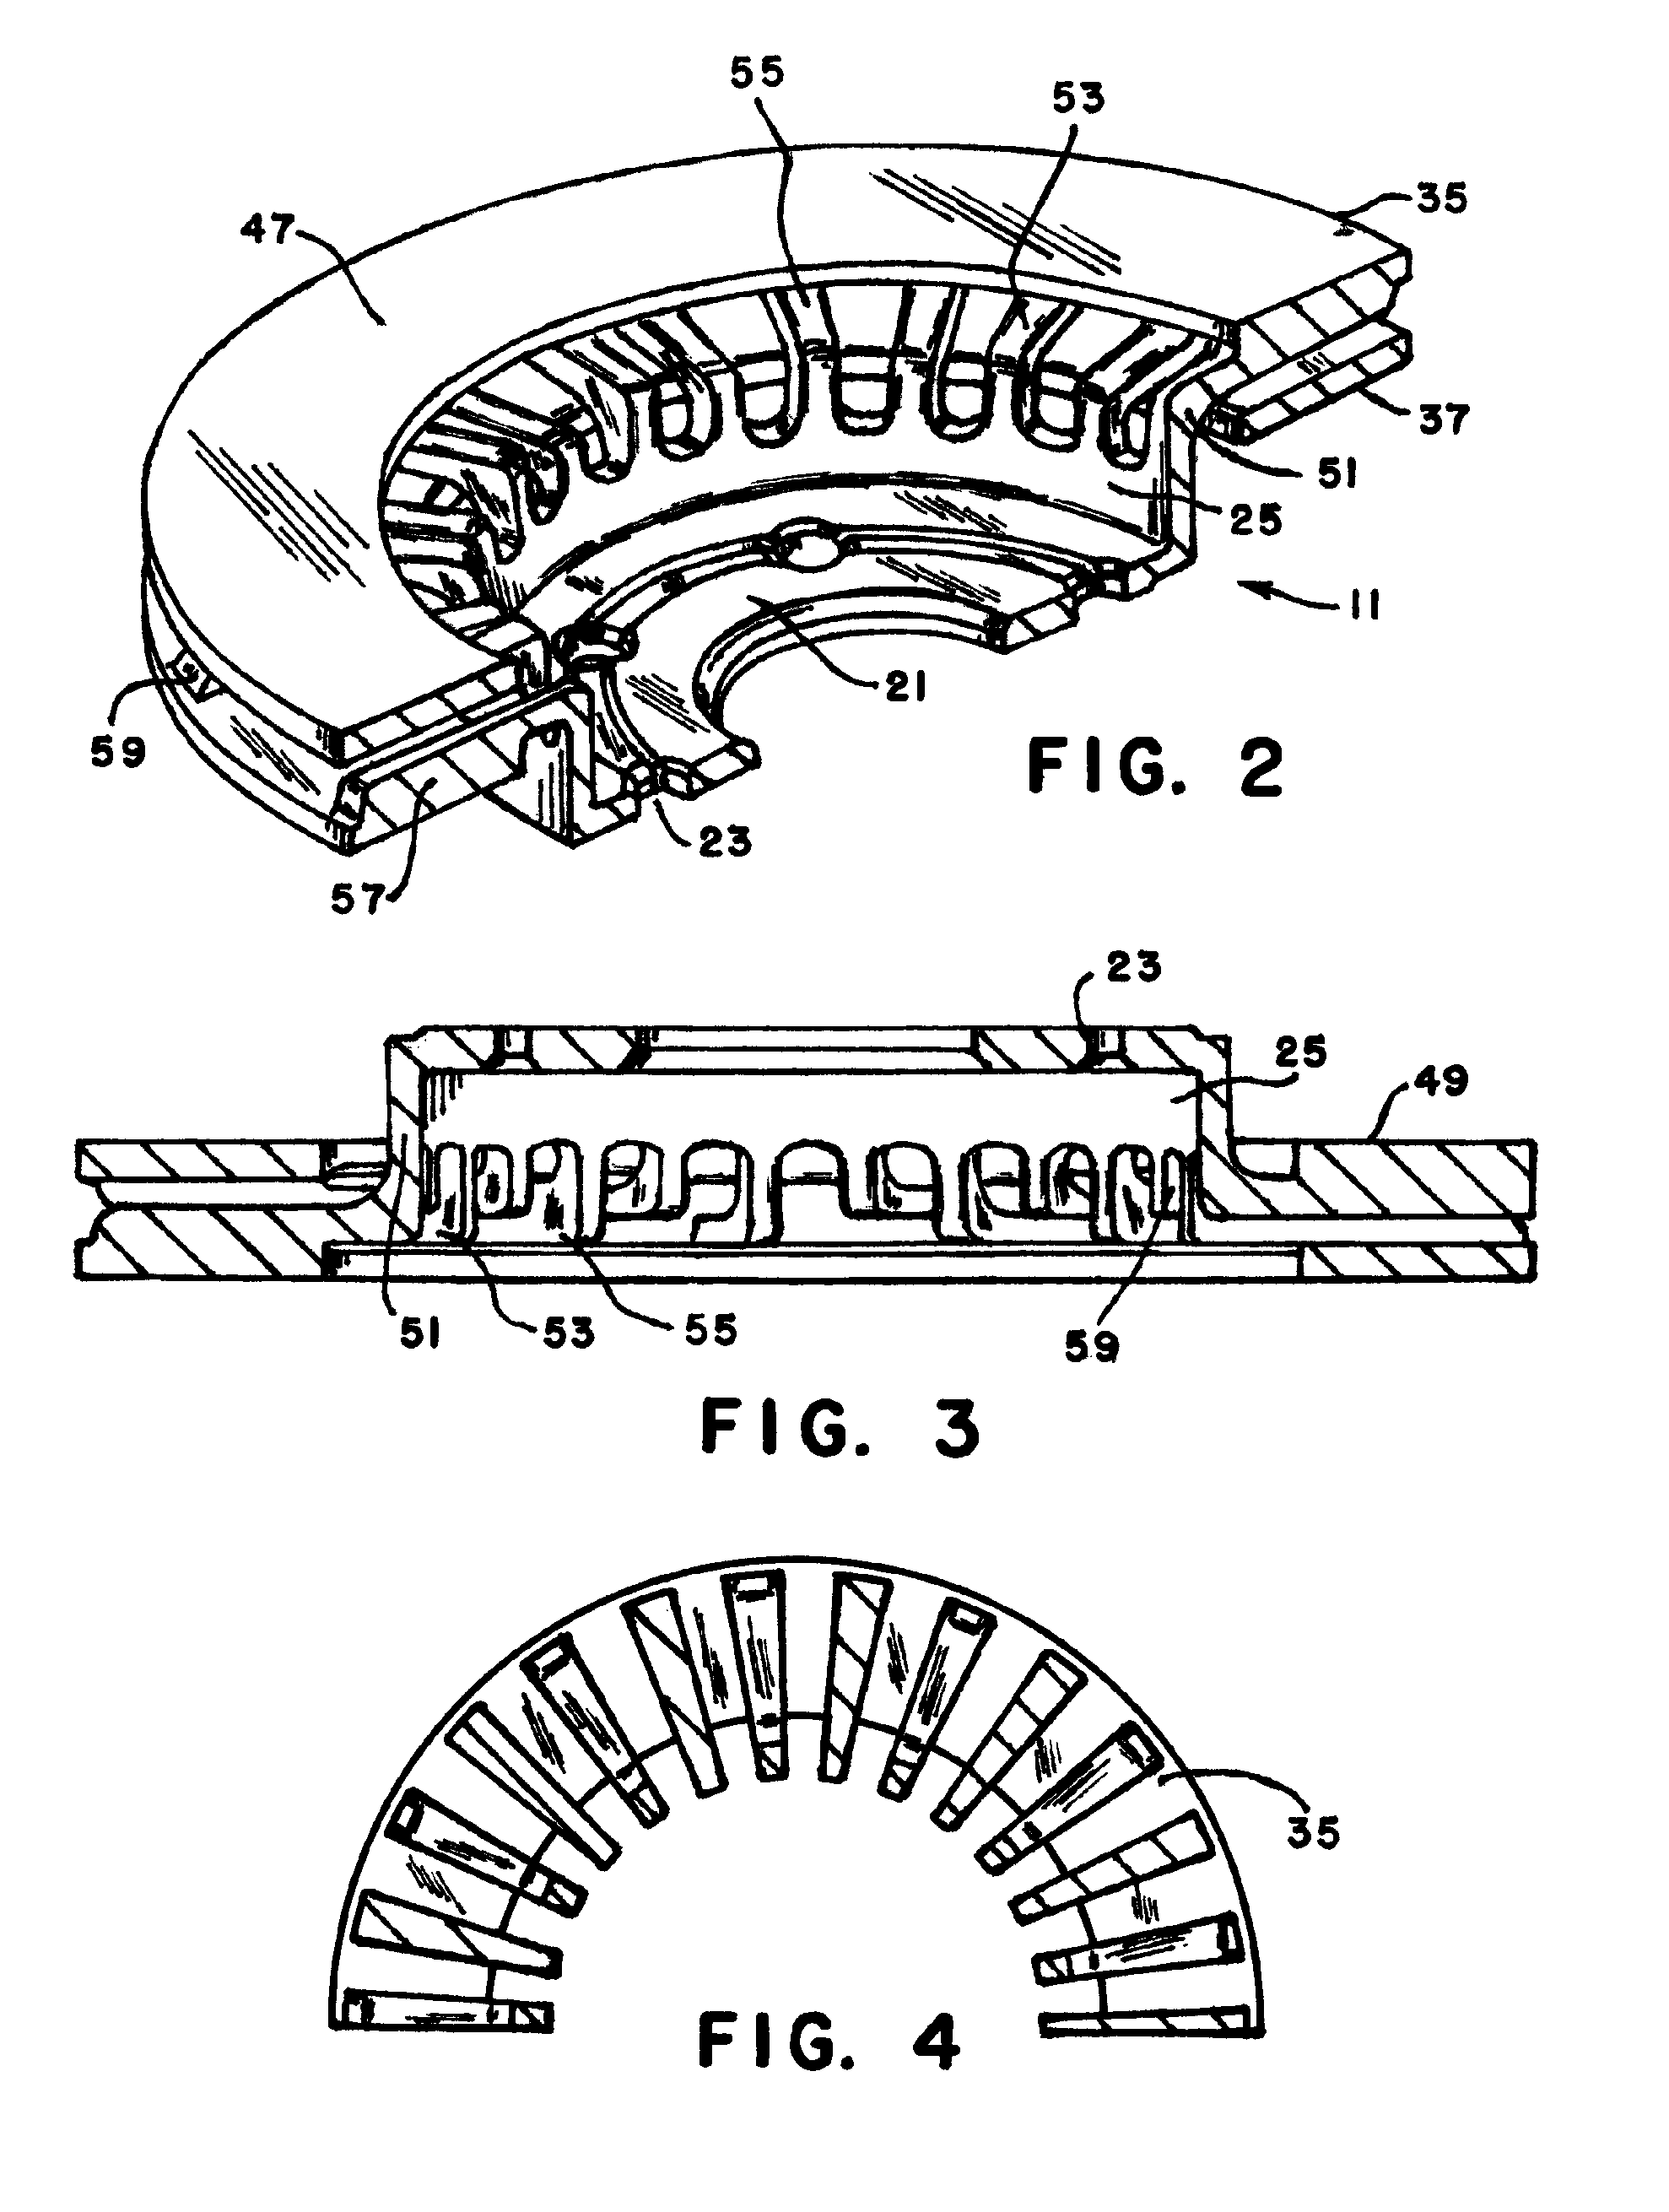 Vented rotor